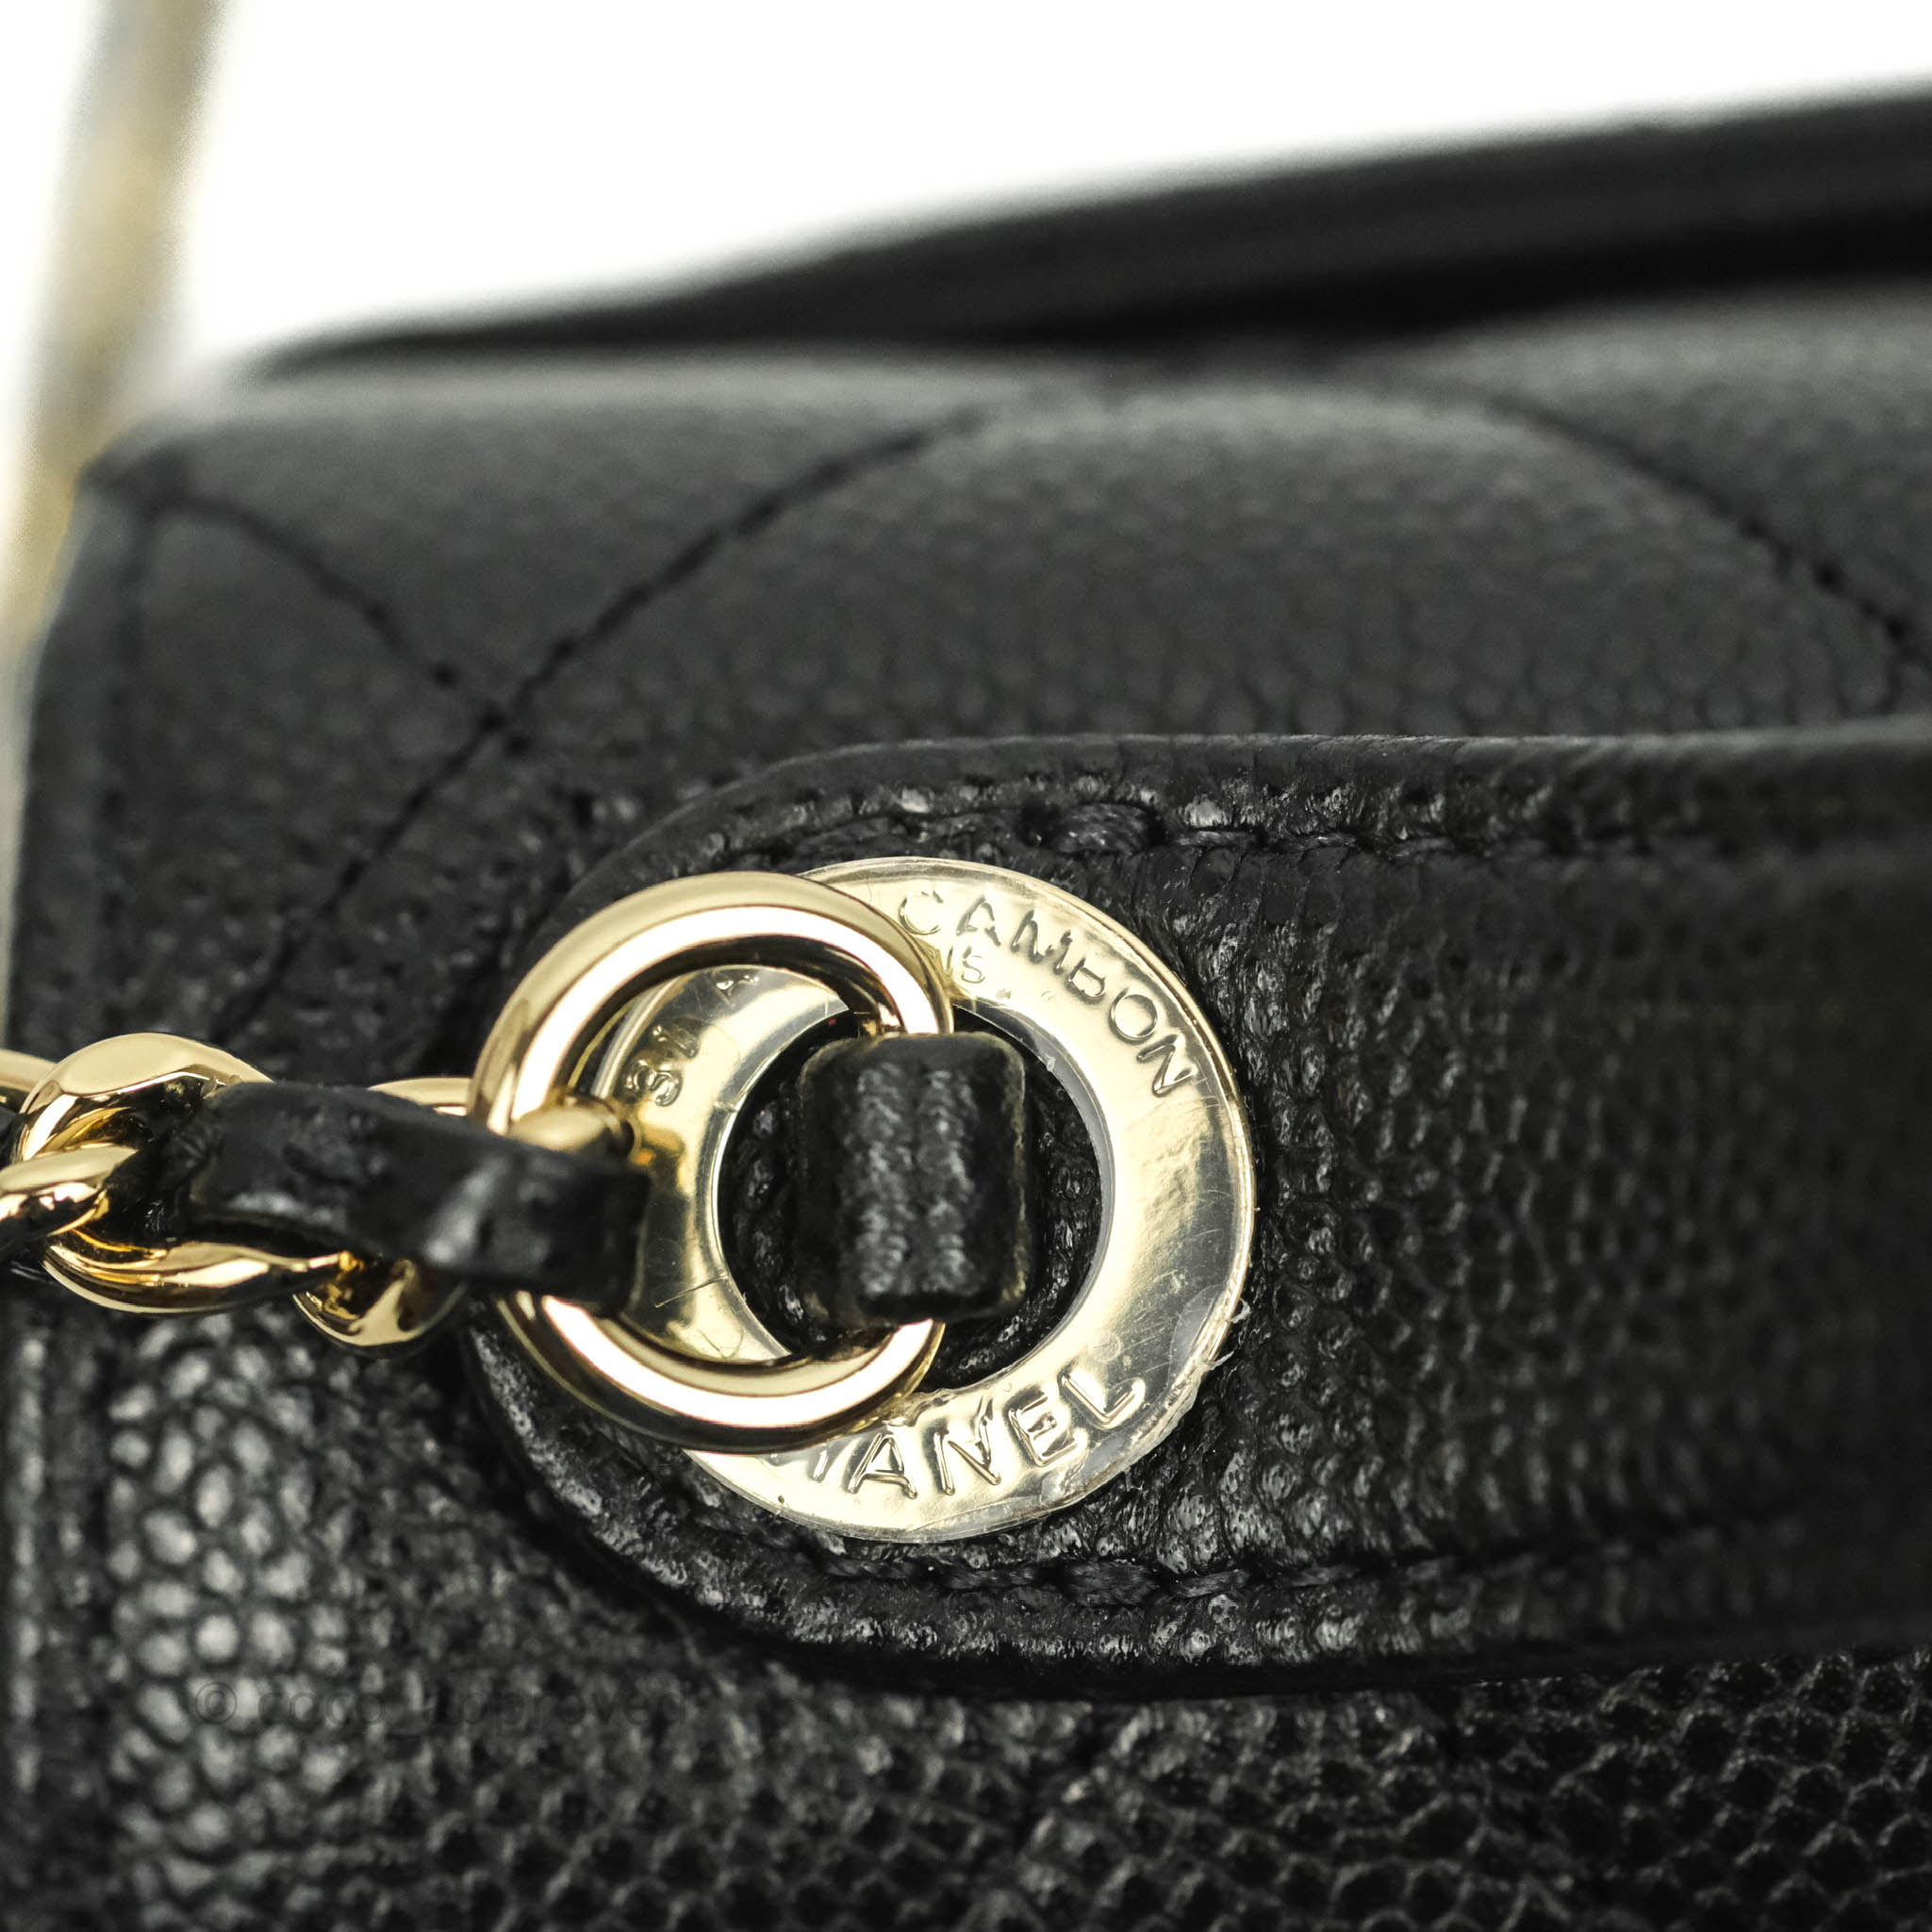 Chanel Medium Business Affinity Bag in Black Caviar with Champagne Gold  Hardware - SOLD